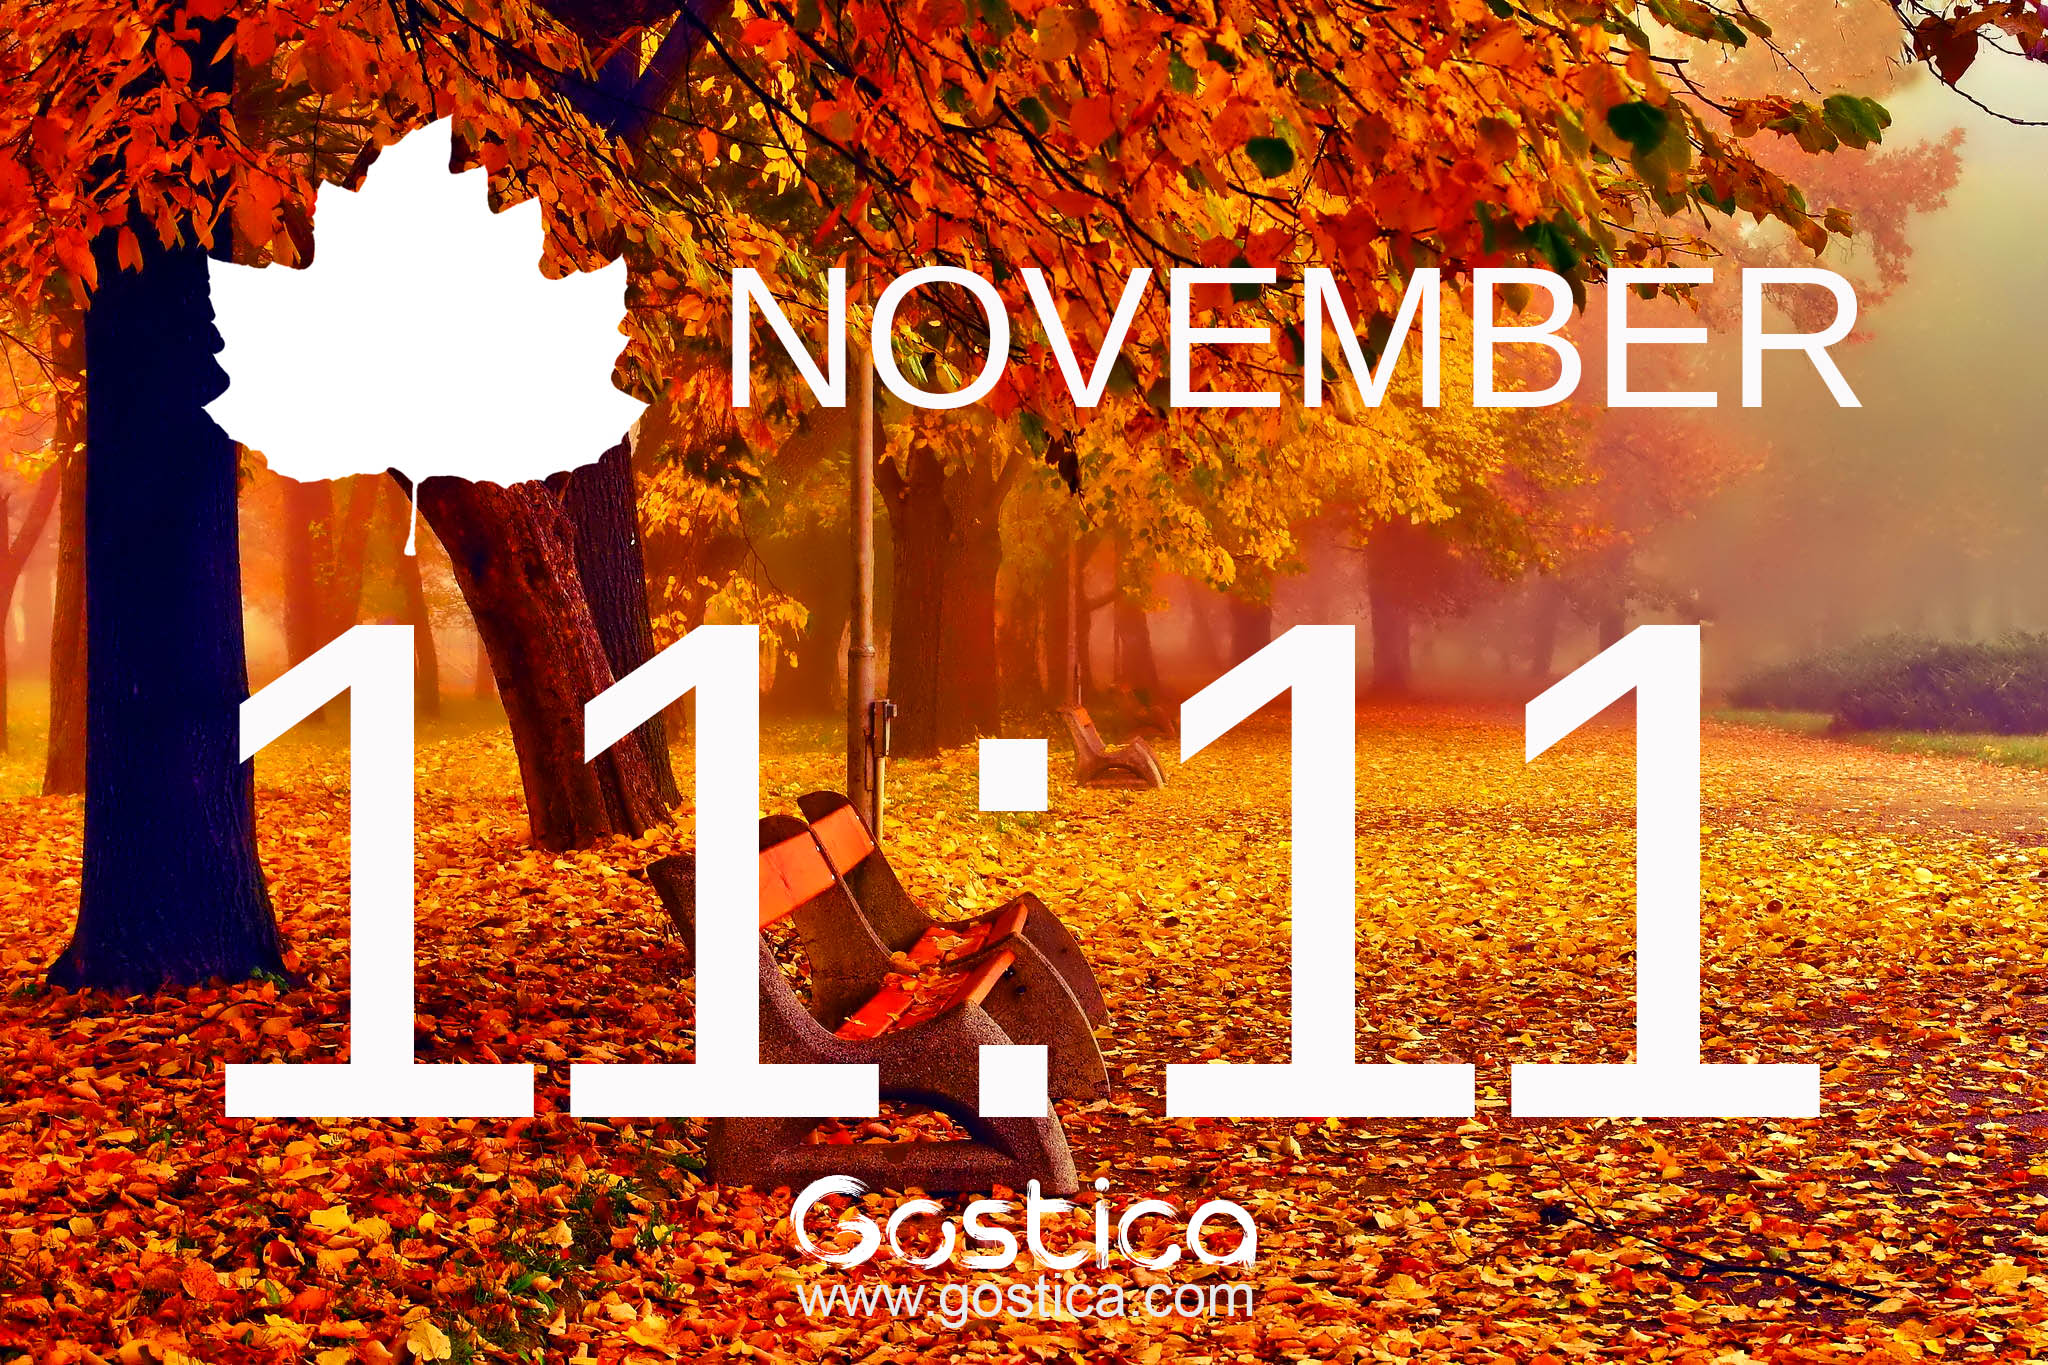 Today-is-November-11-Here-Is-The-Spiritual-Significance-Of-The-Most-Meaningful-Point-Of-The-Year-1.jpg